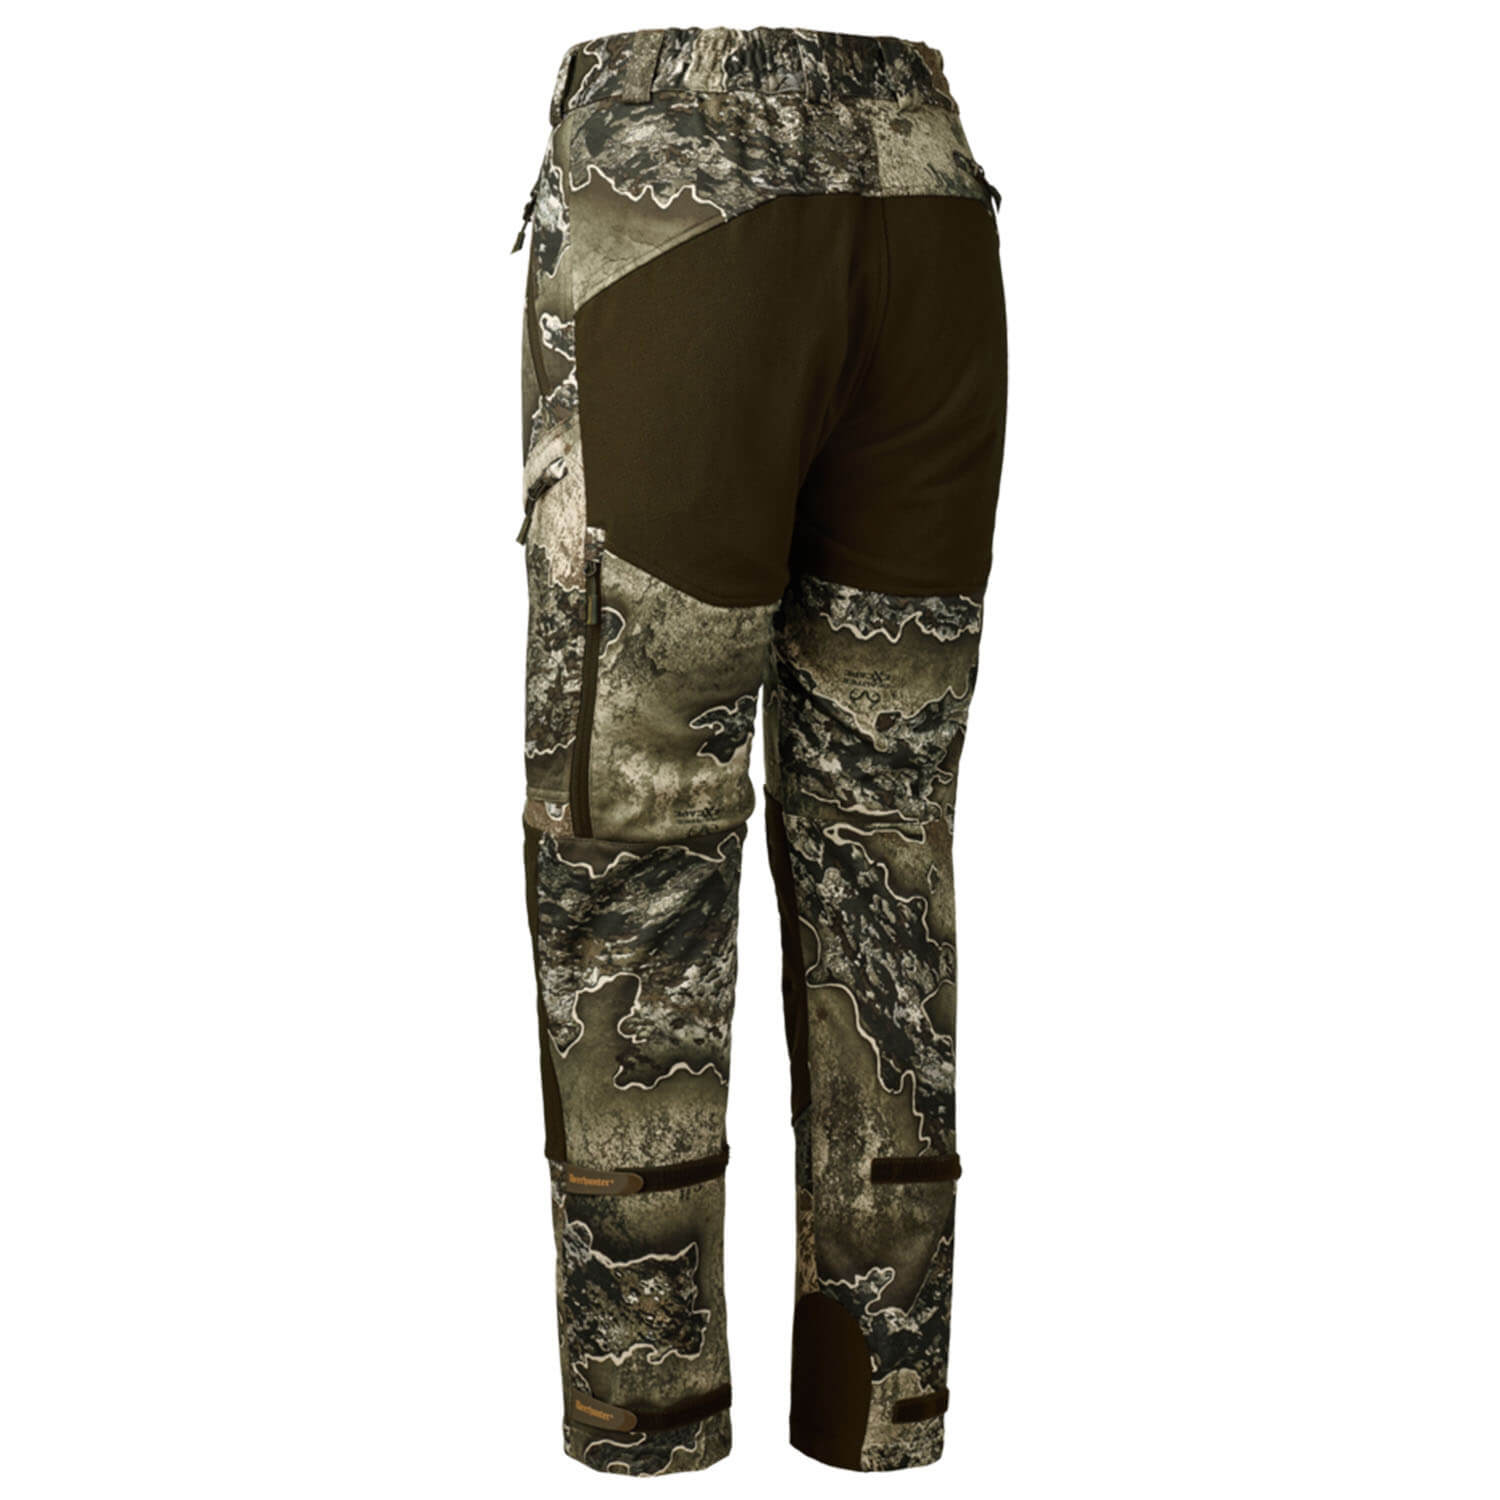 Deerhunter Softshell Trousers Lady Excape (realtree excape)